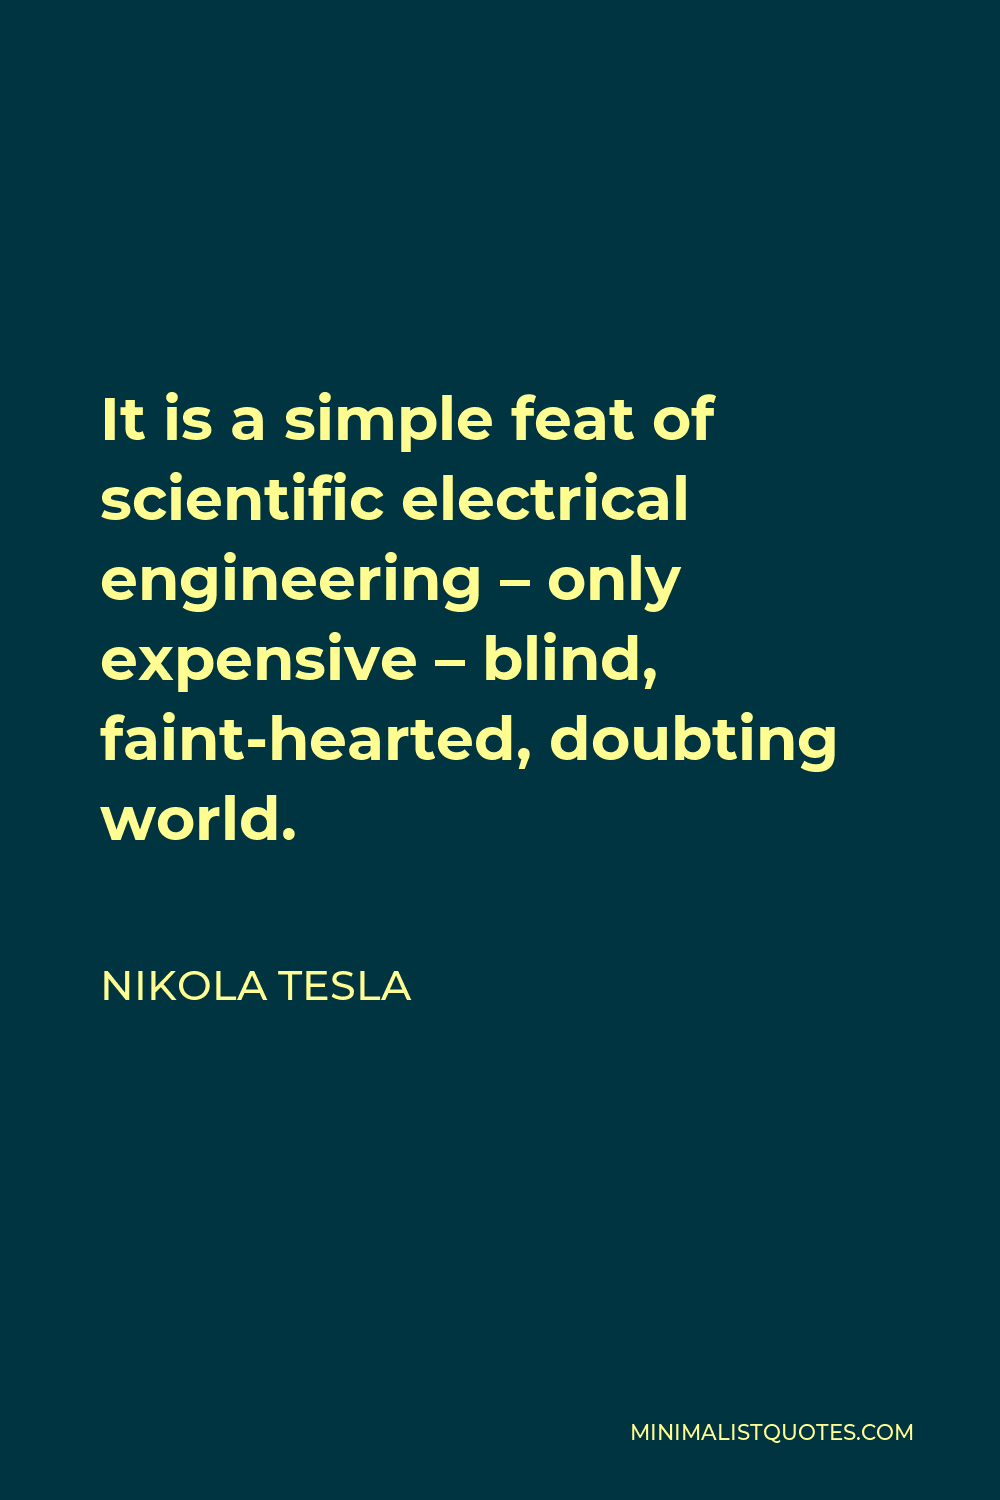 Nikola Tesla Quote - It is a simple feat of scientific electrical engineering – only expensive – blind, faint-hearted, doubting world.